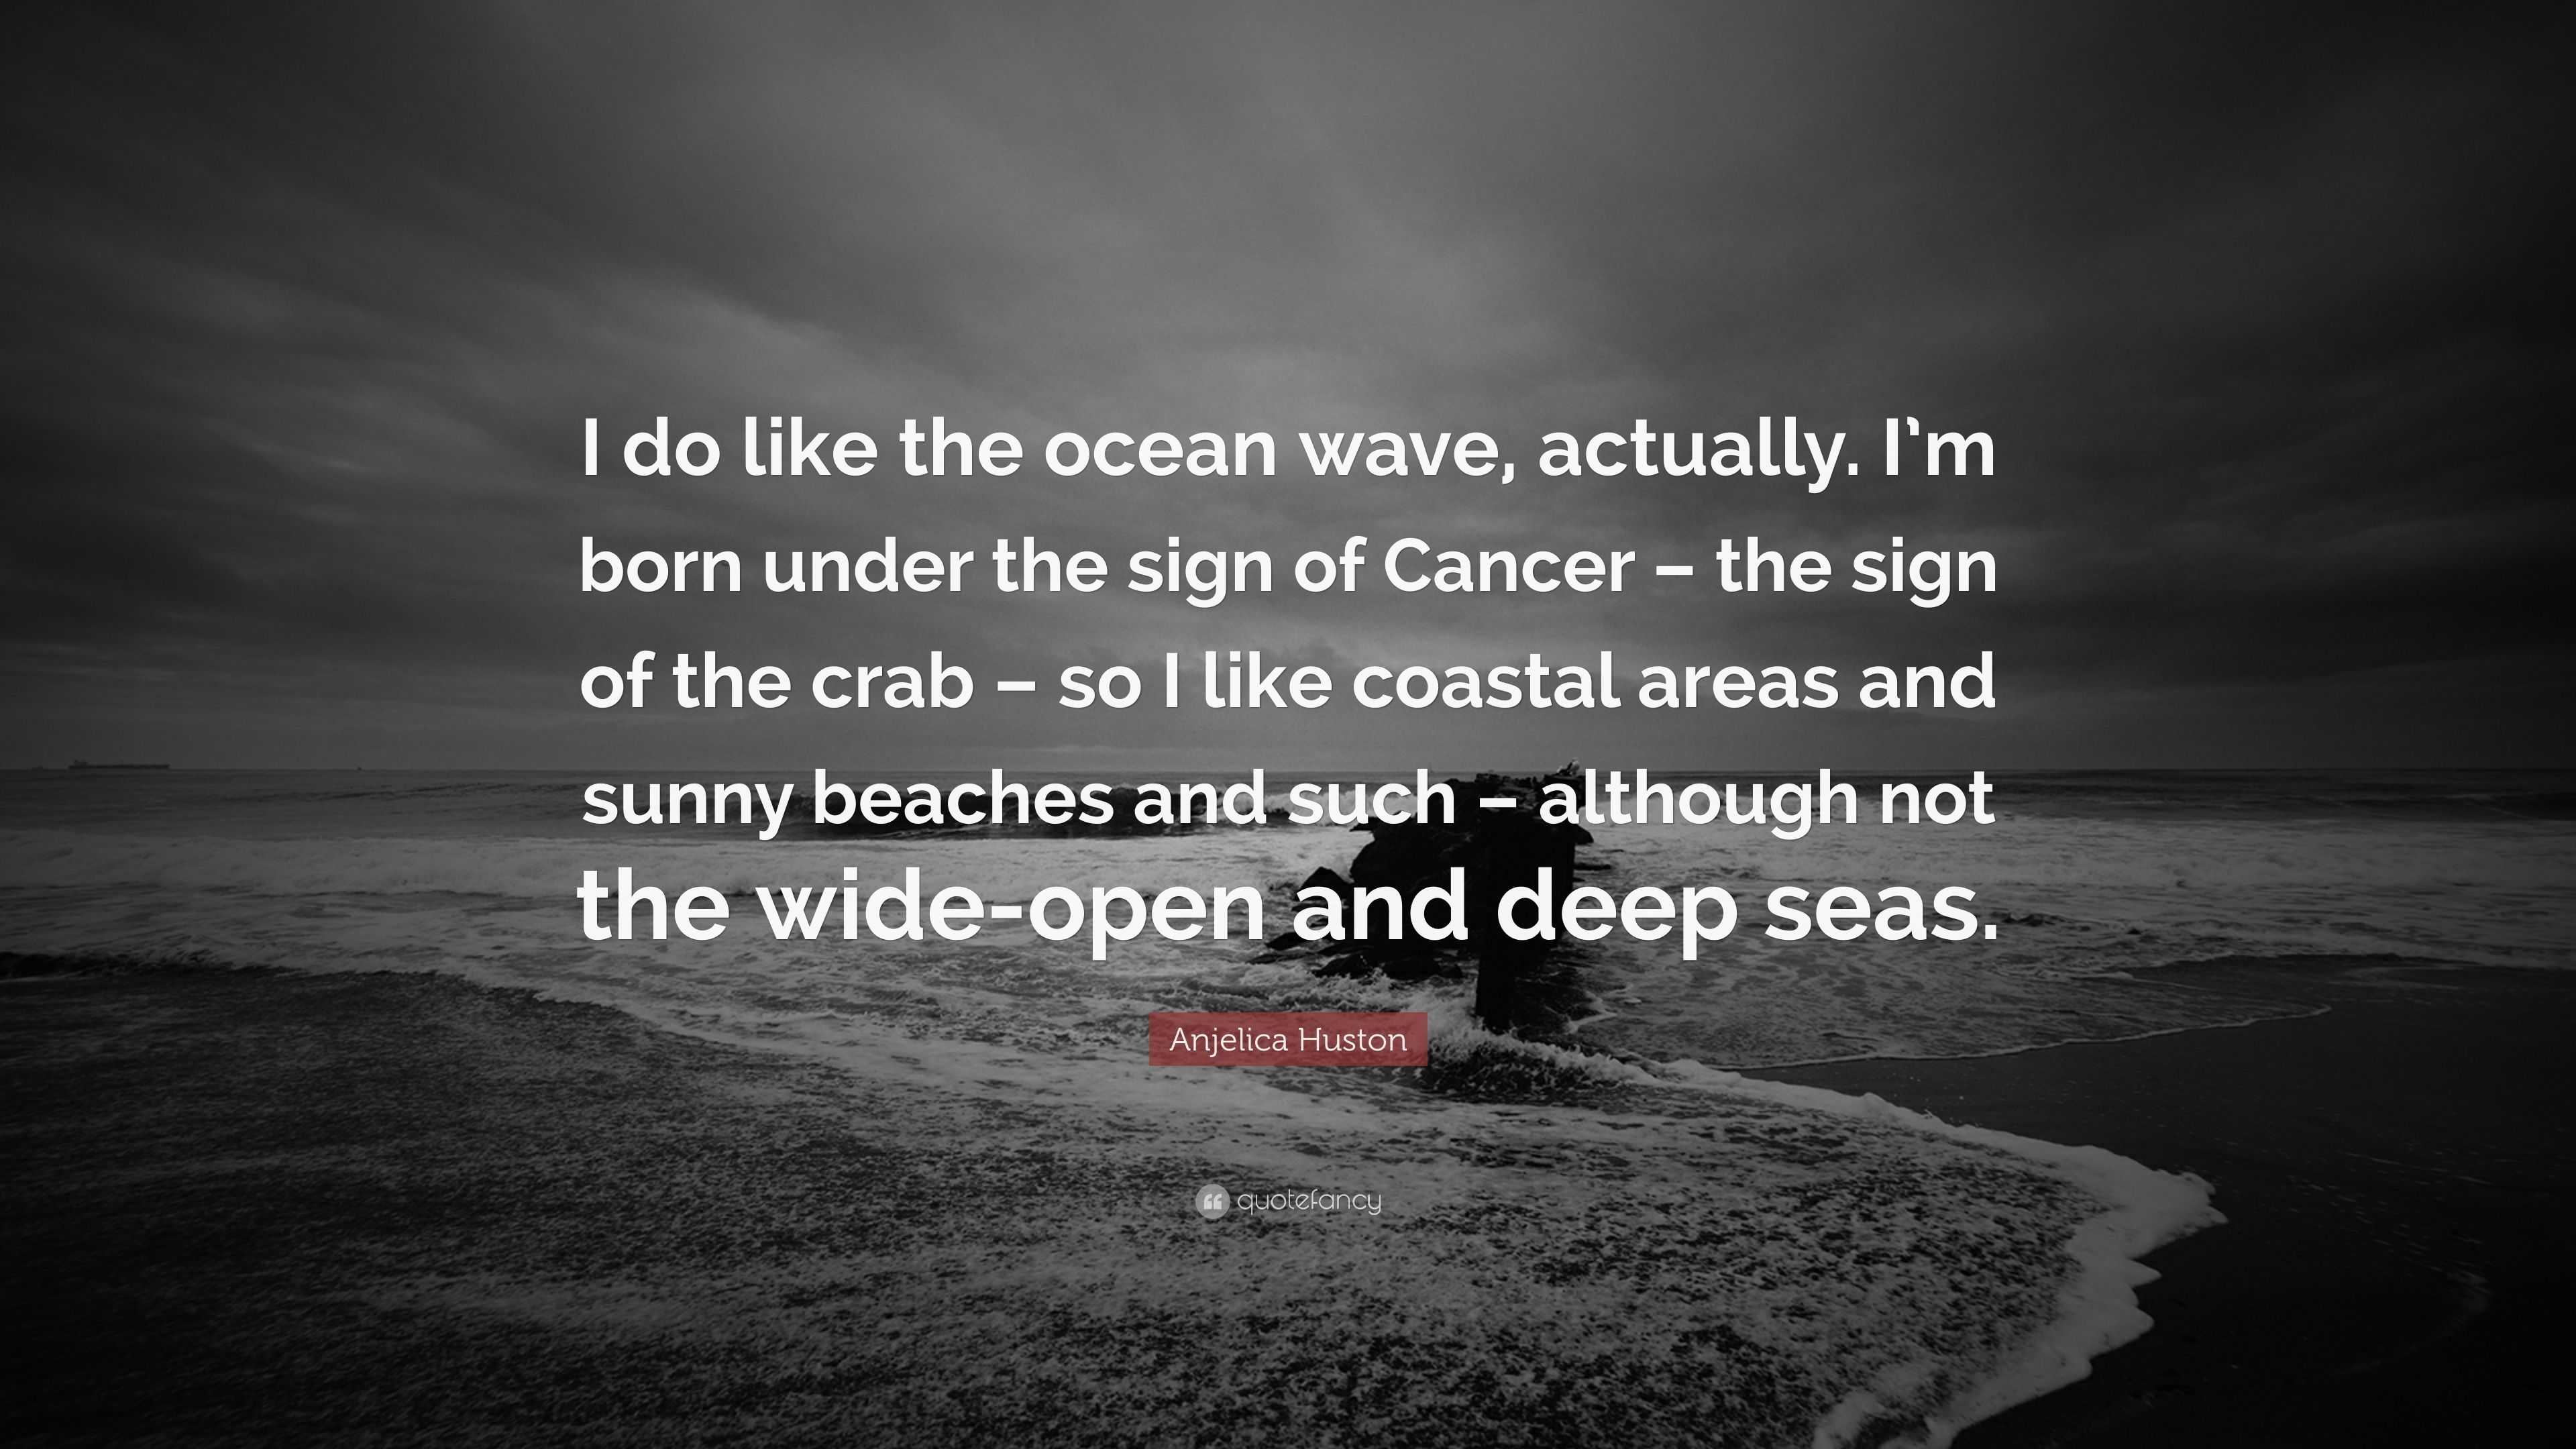 Anjelica Huston Quote “I do like the ocean wave actually I